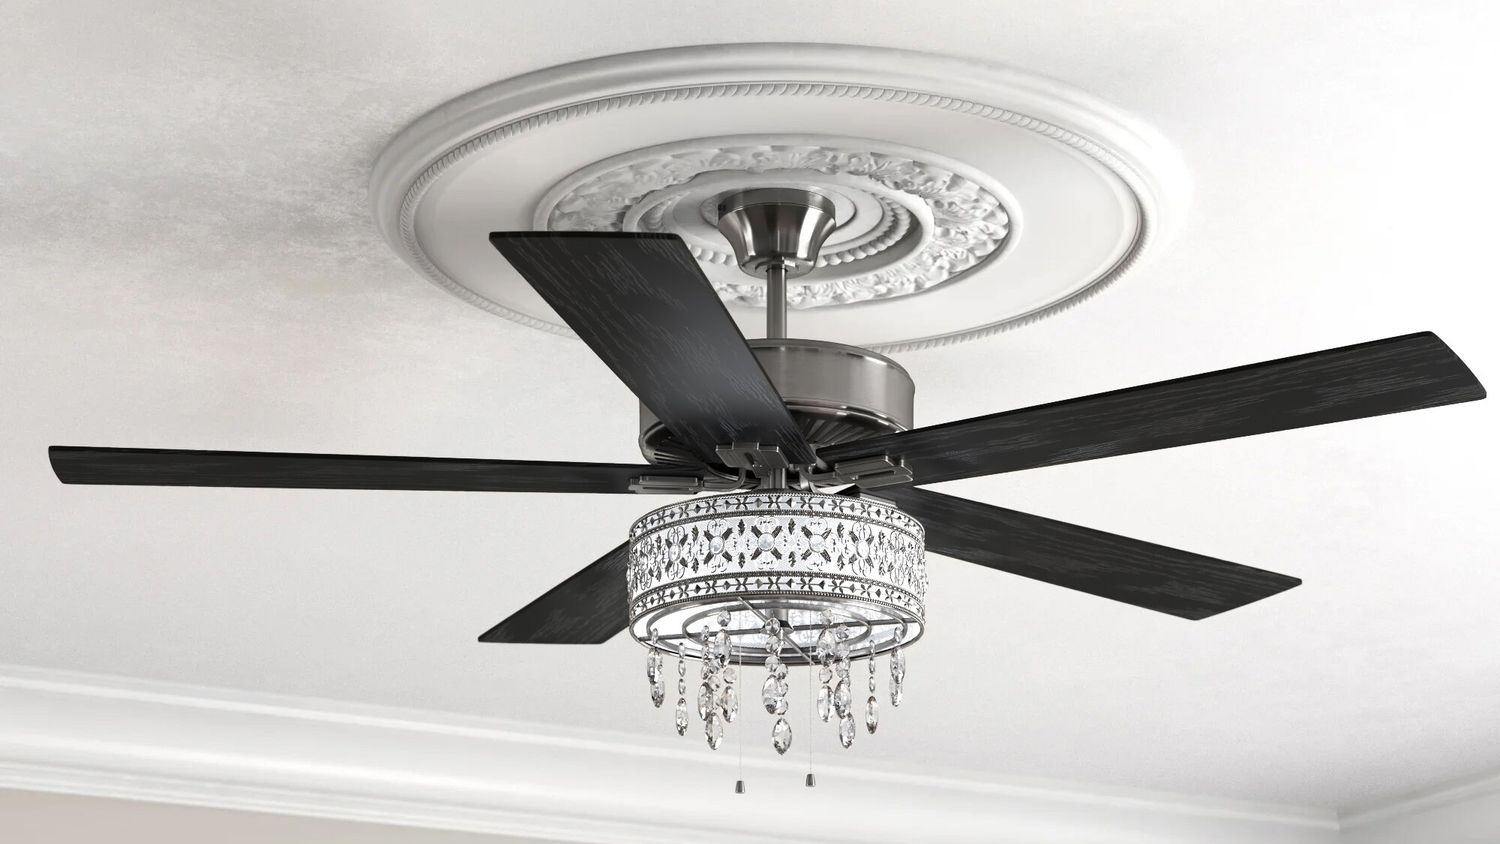 The 10 Best Ceiling Fans In 2021, What Is The Best Ceiling Fan For A Garage